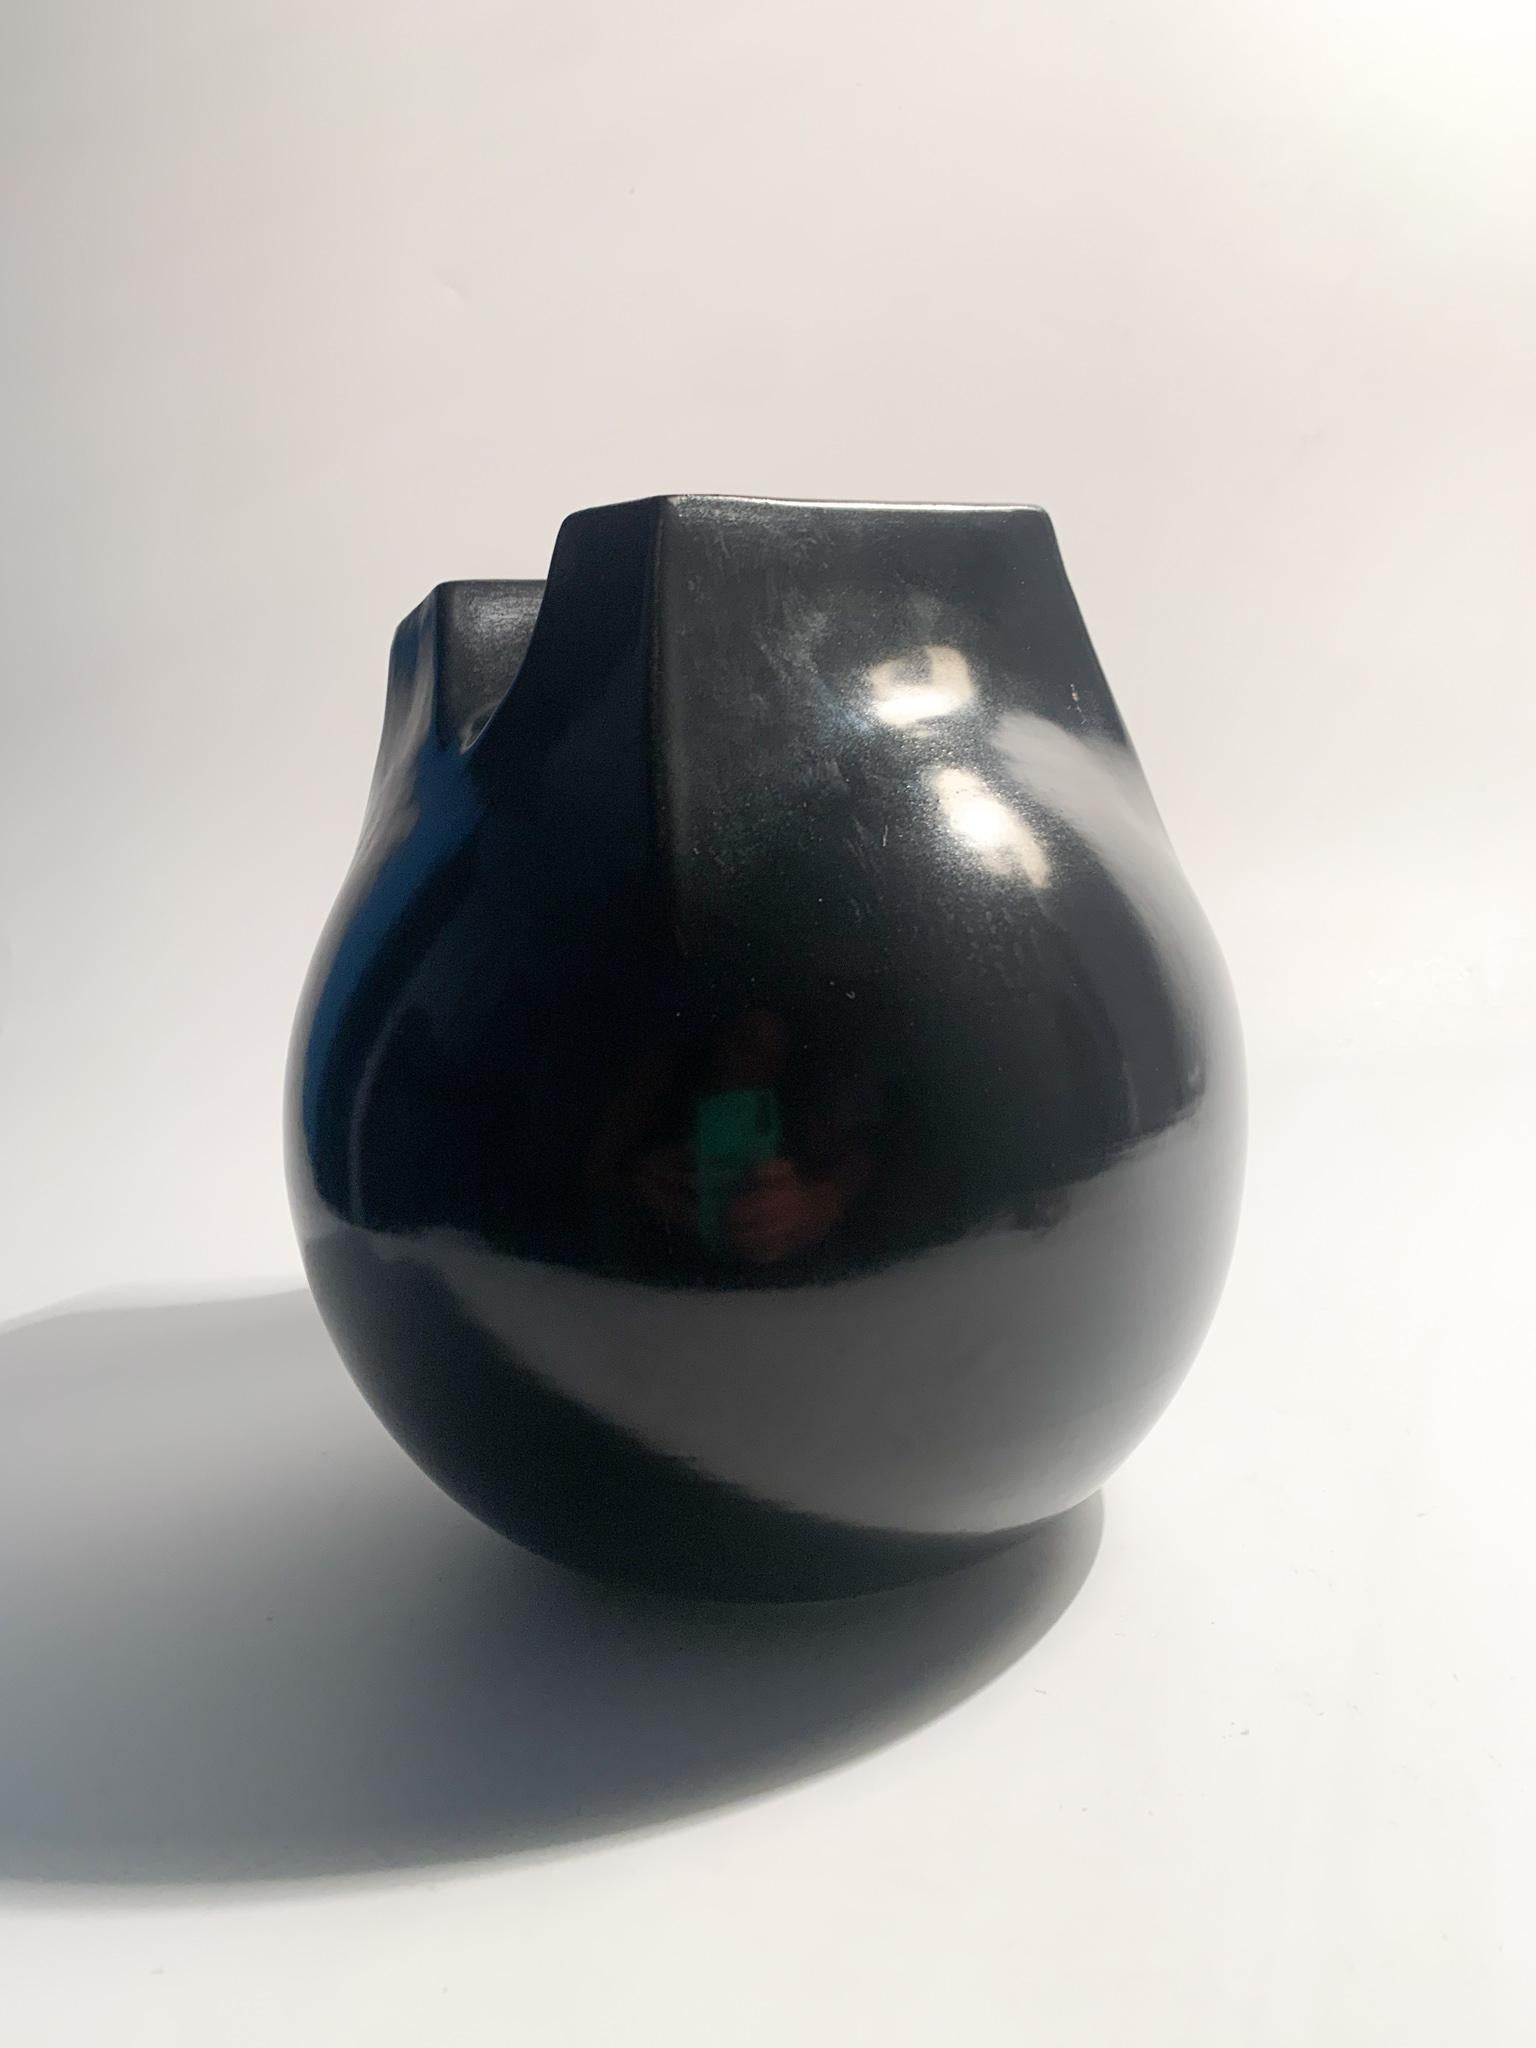 Whistle Ceramic Vase with Double Mouth by Franco Bucci from the 1970s For Sale 2